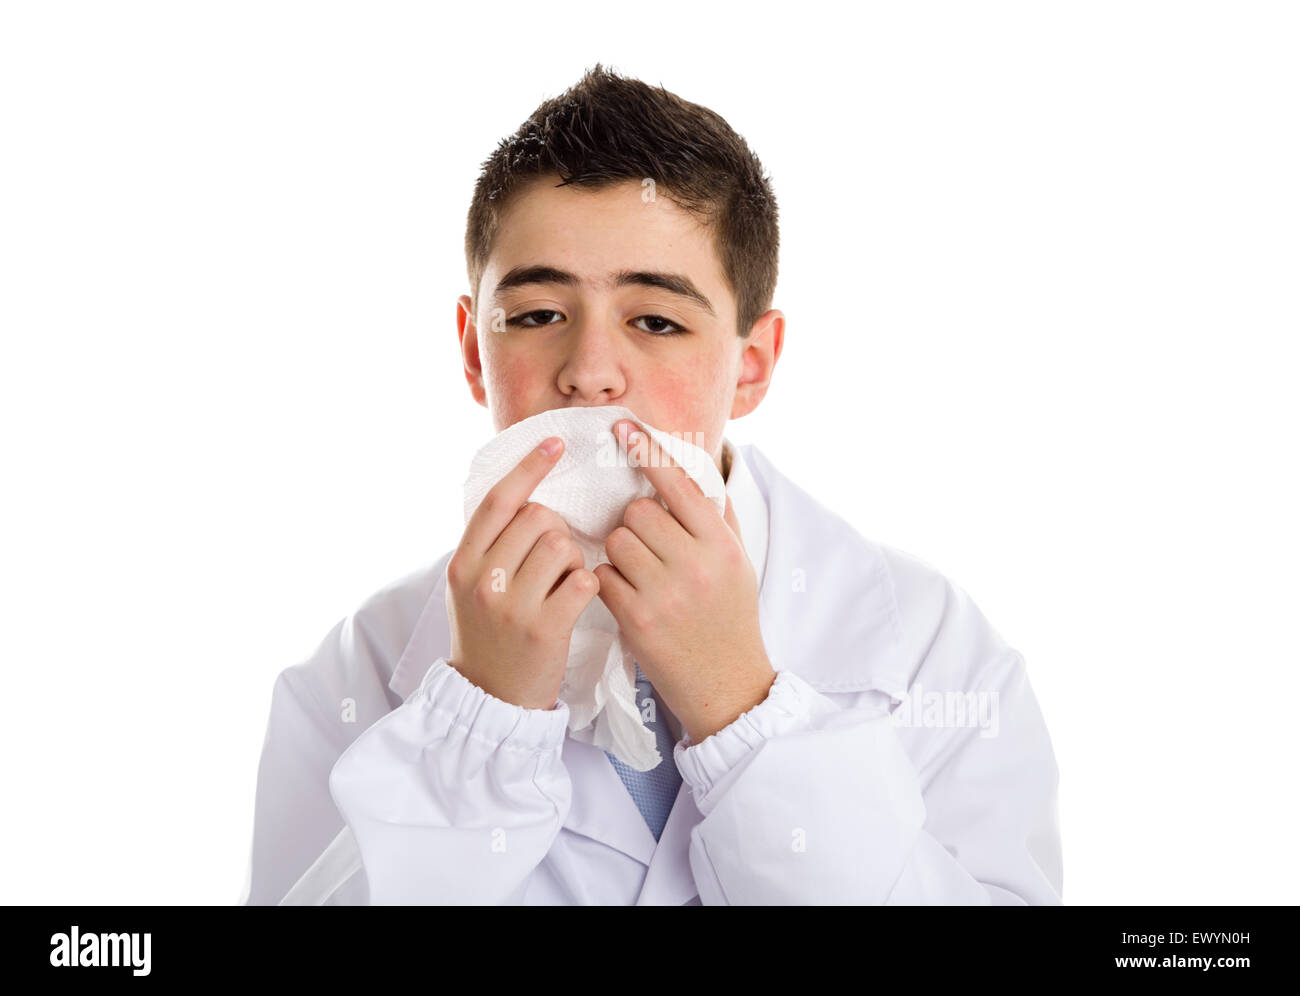 A boy doctor in white coat and blue tie helps to feel medicine more friendly: he is cleaning his lips with handkerchief.. His acne skin has not ben retouched Stock Photo